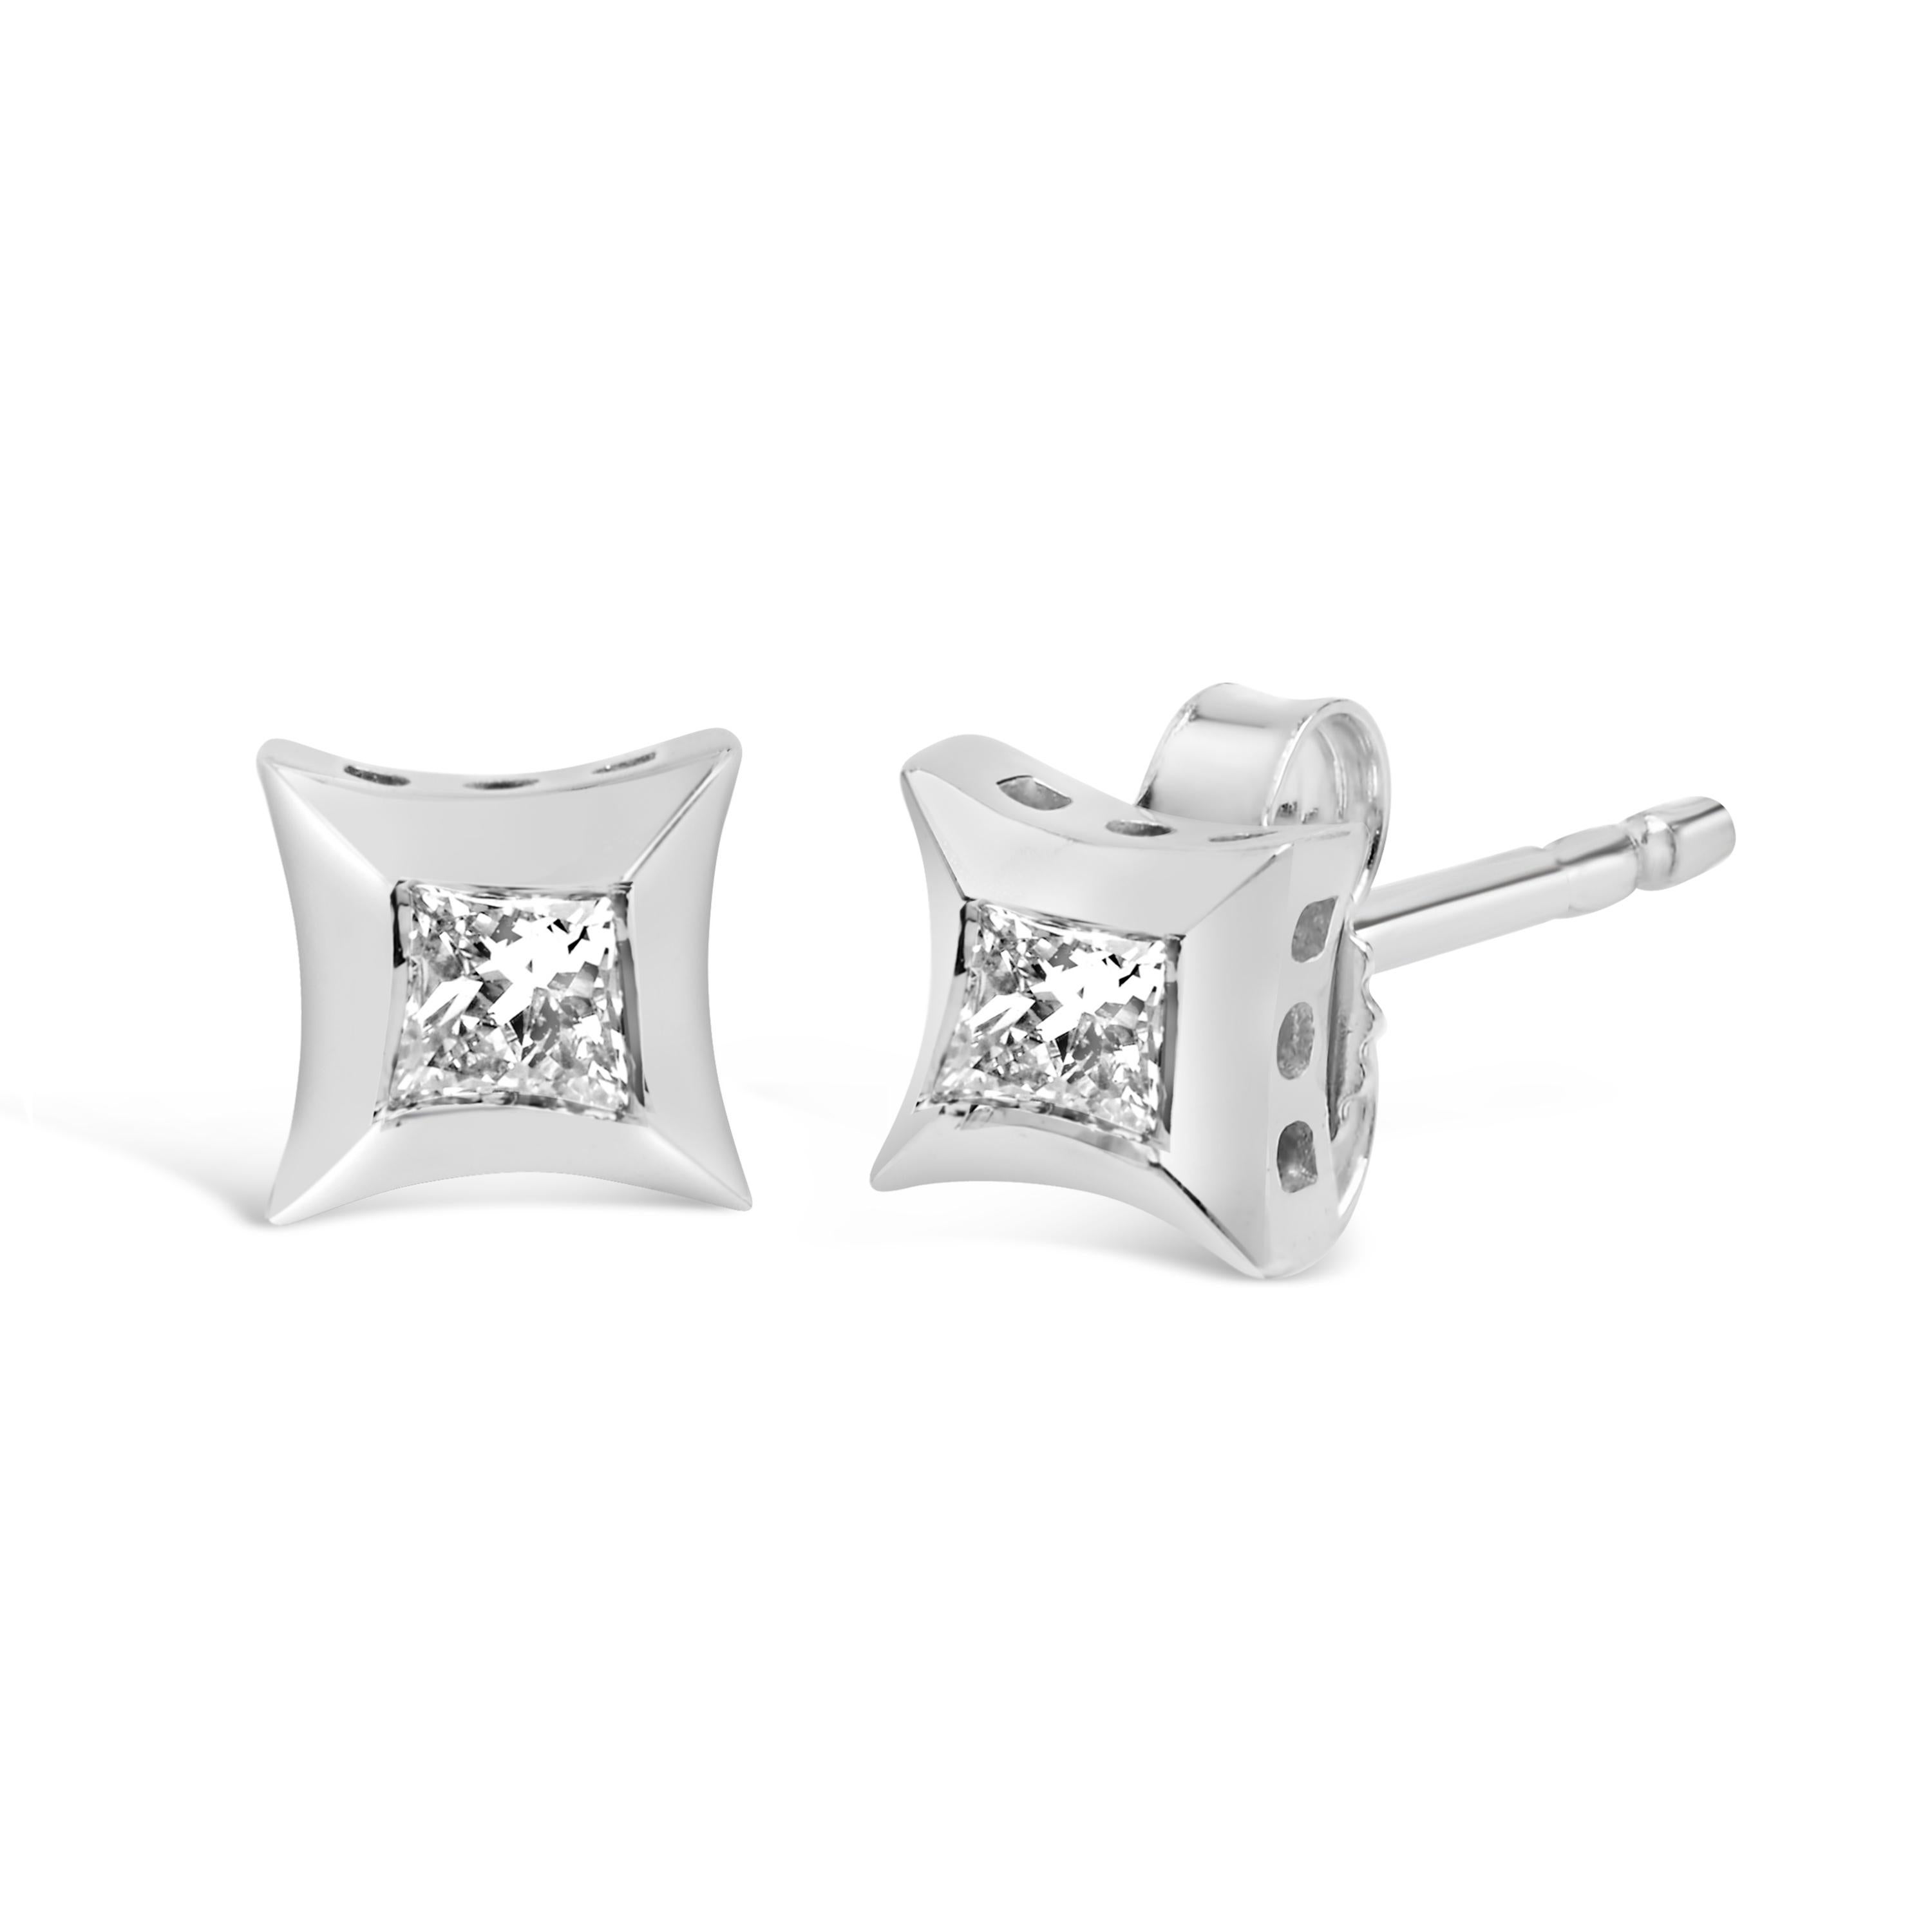 Introducing a dazzling pair of earrings that will make heads turn and hearts skip a beat. Crafted in 10K white gold, these exquisite stud earrings feature a captivating duo of princess-cut diamonds. With a total weight of 1/5 carats, these diamonds